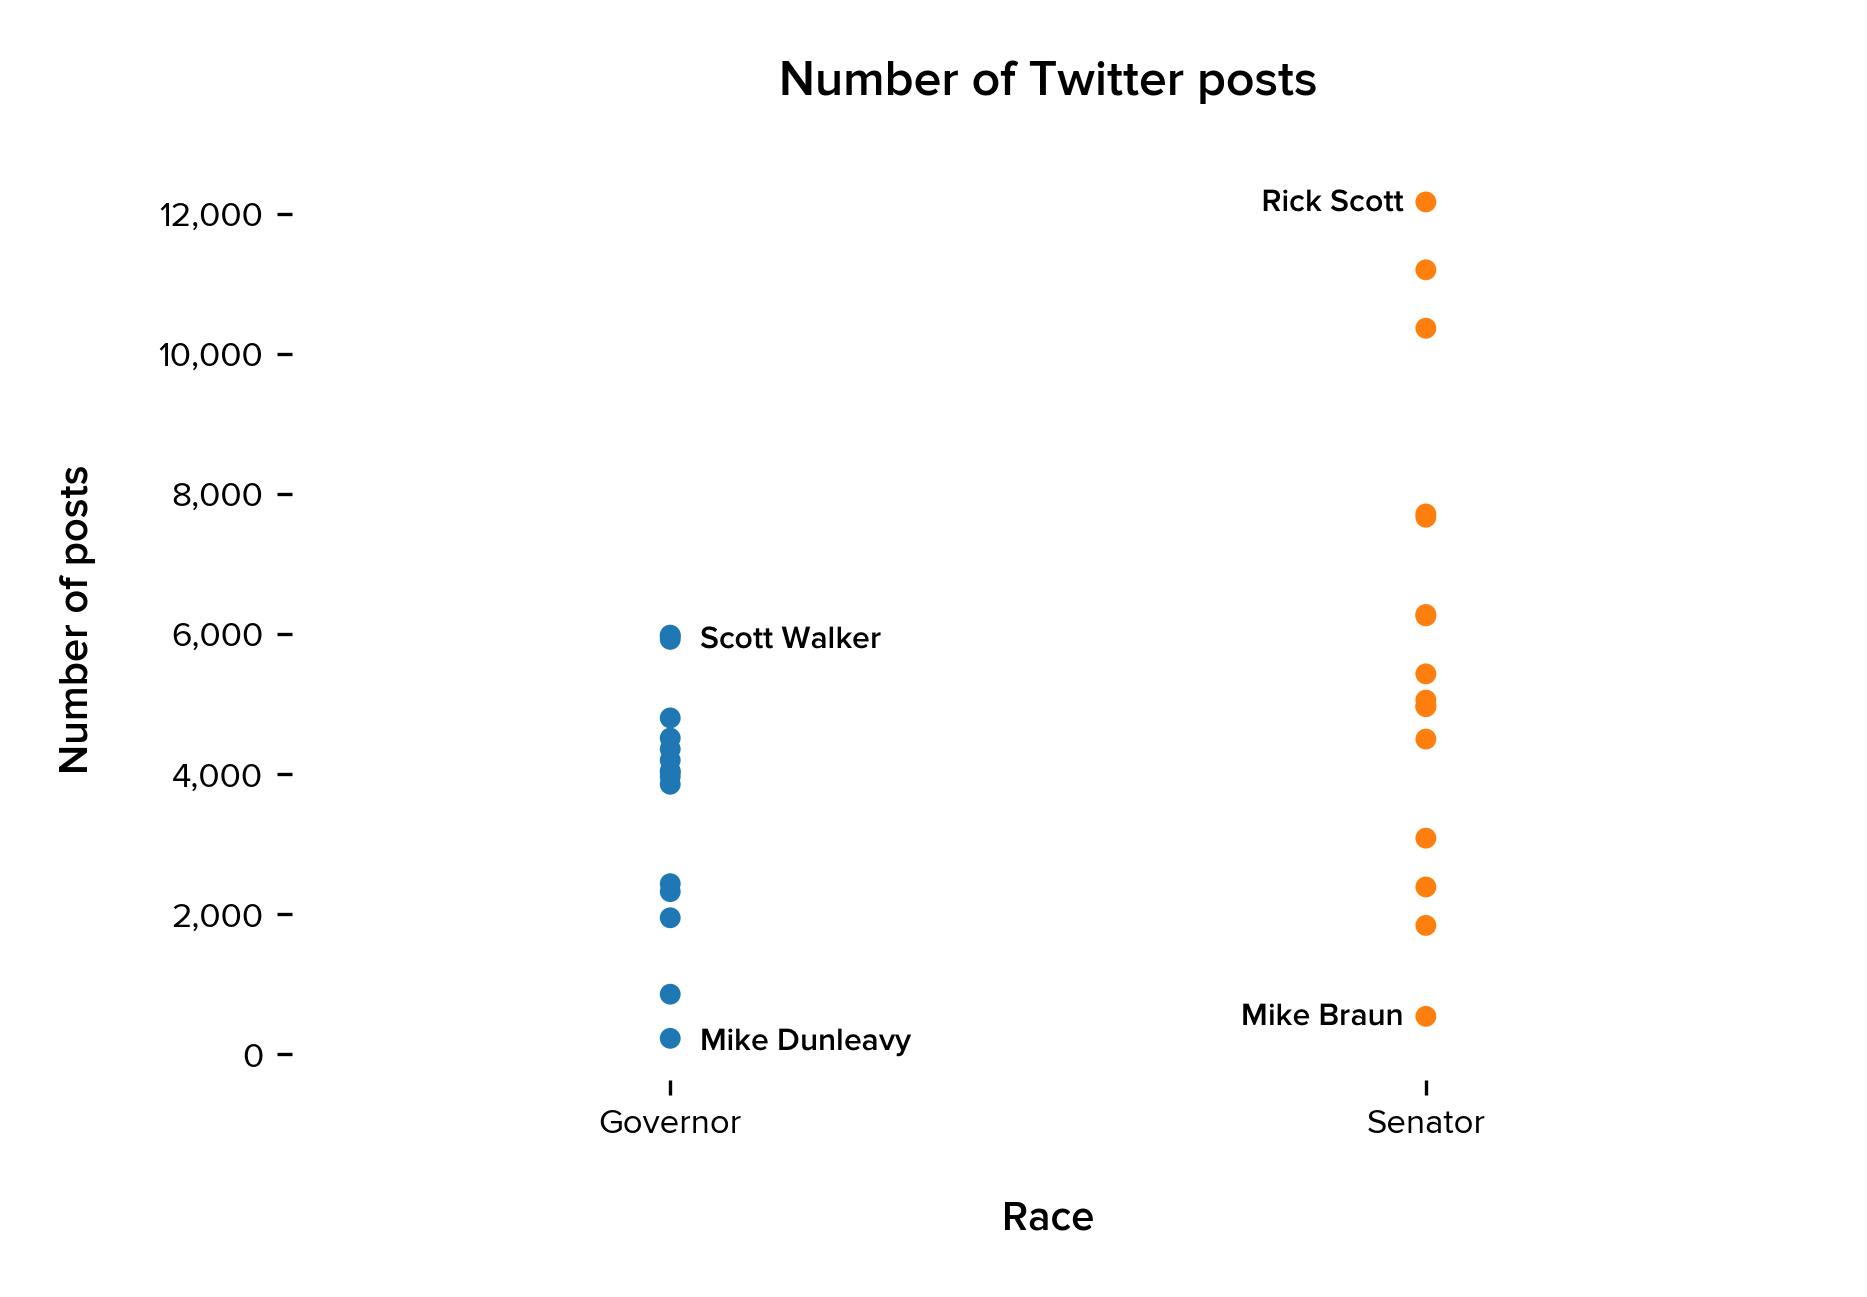  Distribution of the number of Twitter posts based on position candidate is running for. Each dot represents an individual candidate. We have indicated which candidates have the highest and lowest number of posts on Twitter. 